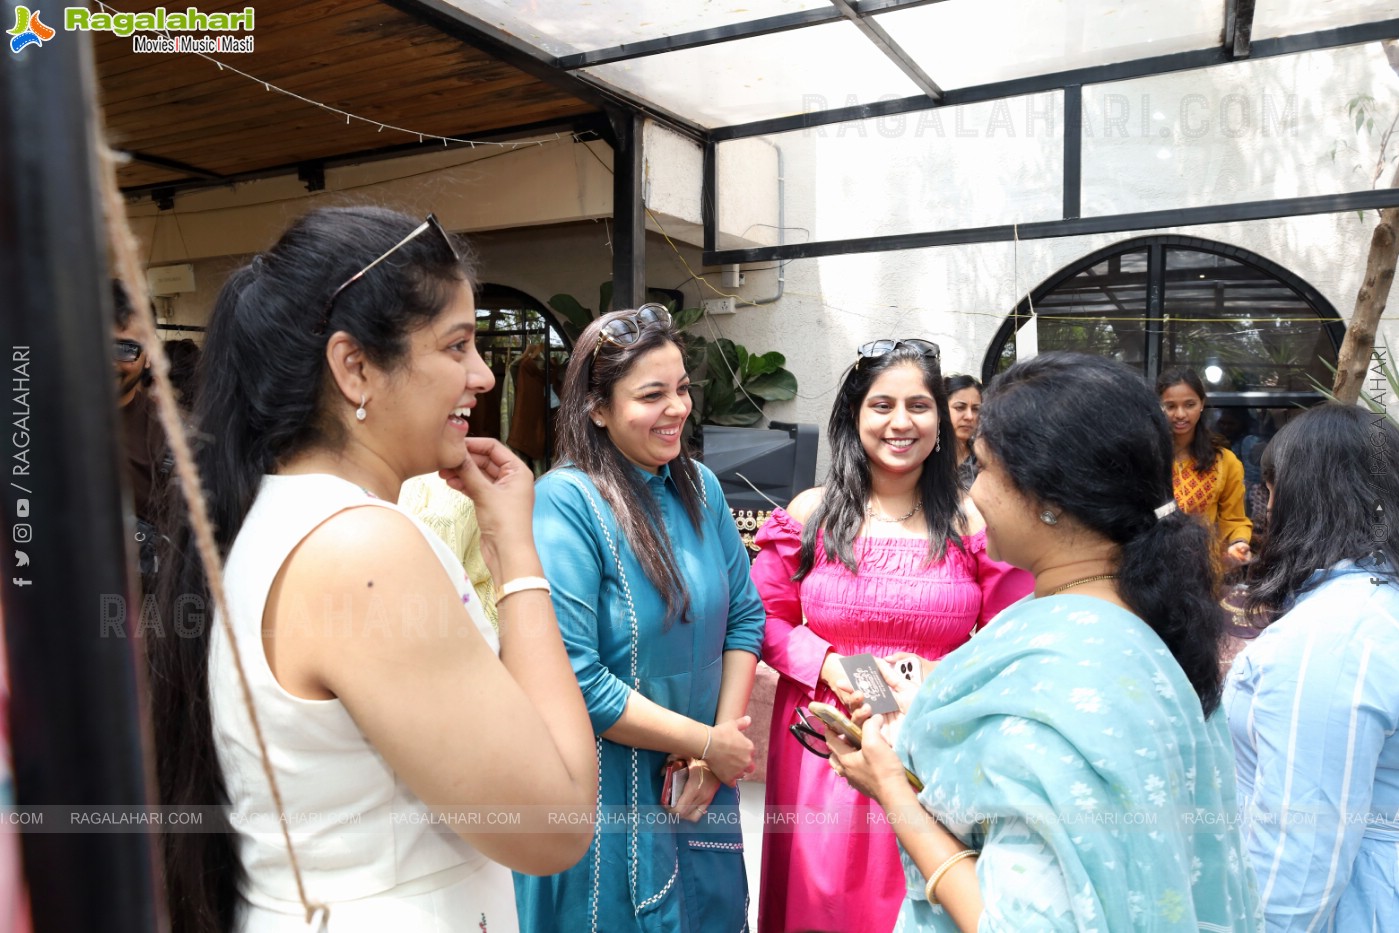 Inauguration of Reserve’s First Edition at Jubilee Hills, Hyderabad